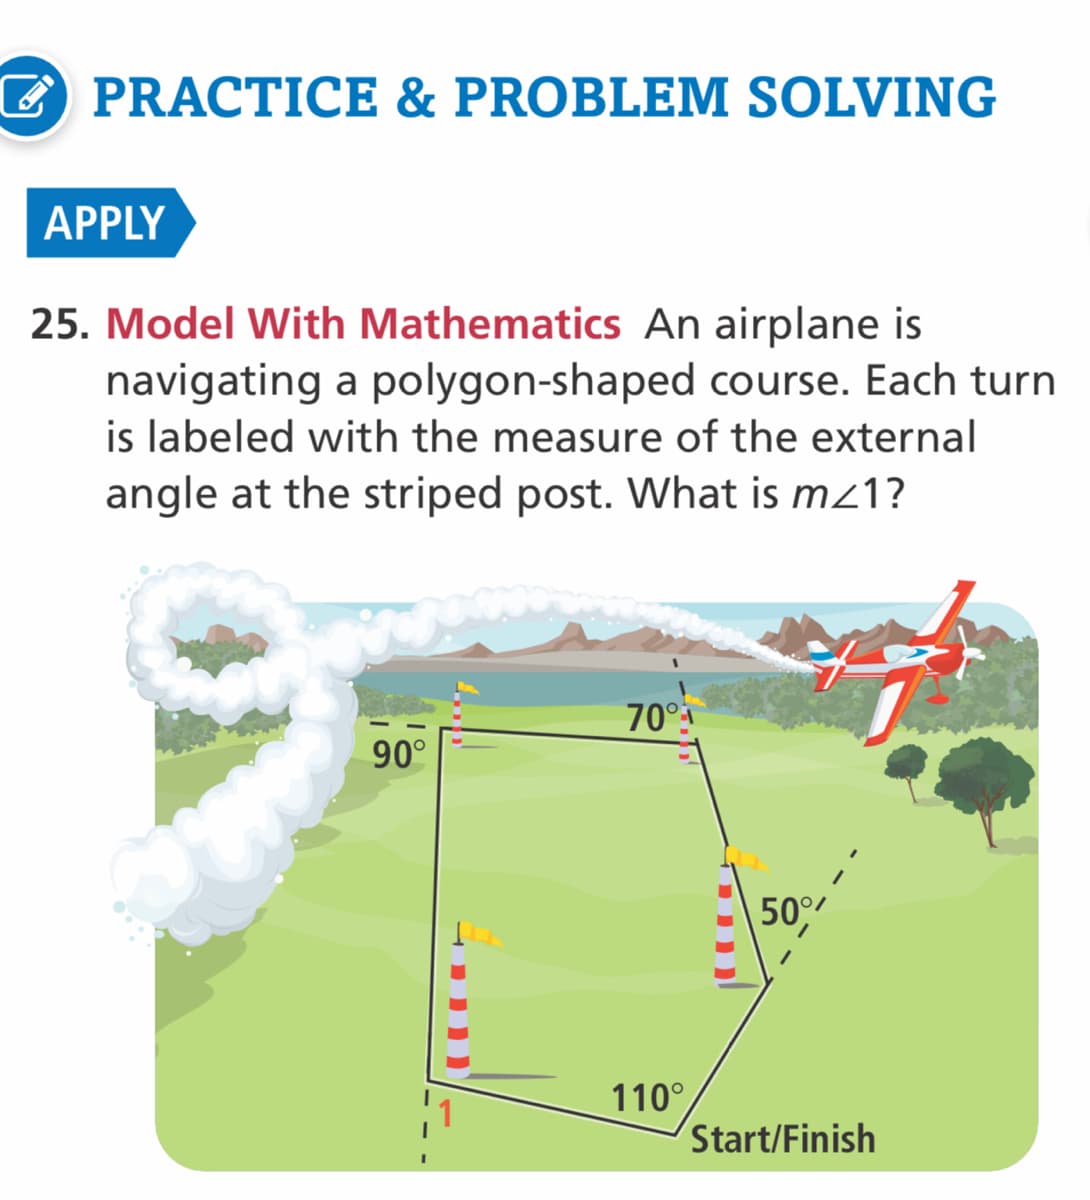 EPRACTICE & PROBLEM SOLVING
APPLY
25. Model With Mathematics An airplane is
navigating a polygon-shaped course. Each turn
is labeled with the measure of the external
angle at the striped post. What is mz1?
70°
90°
50°
110°
Start/Finish
